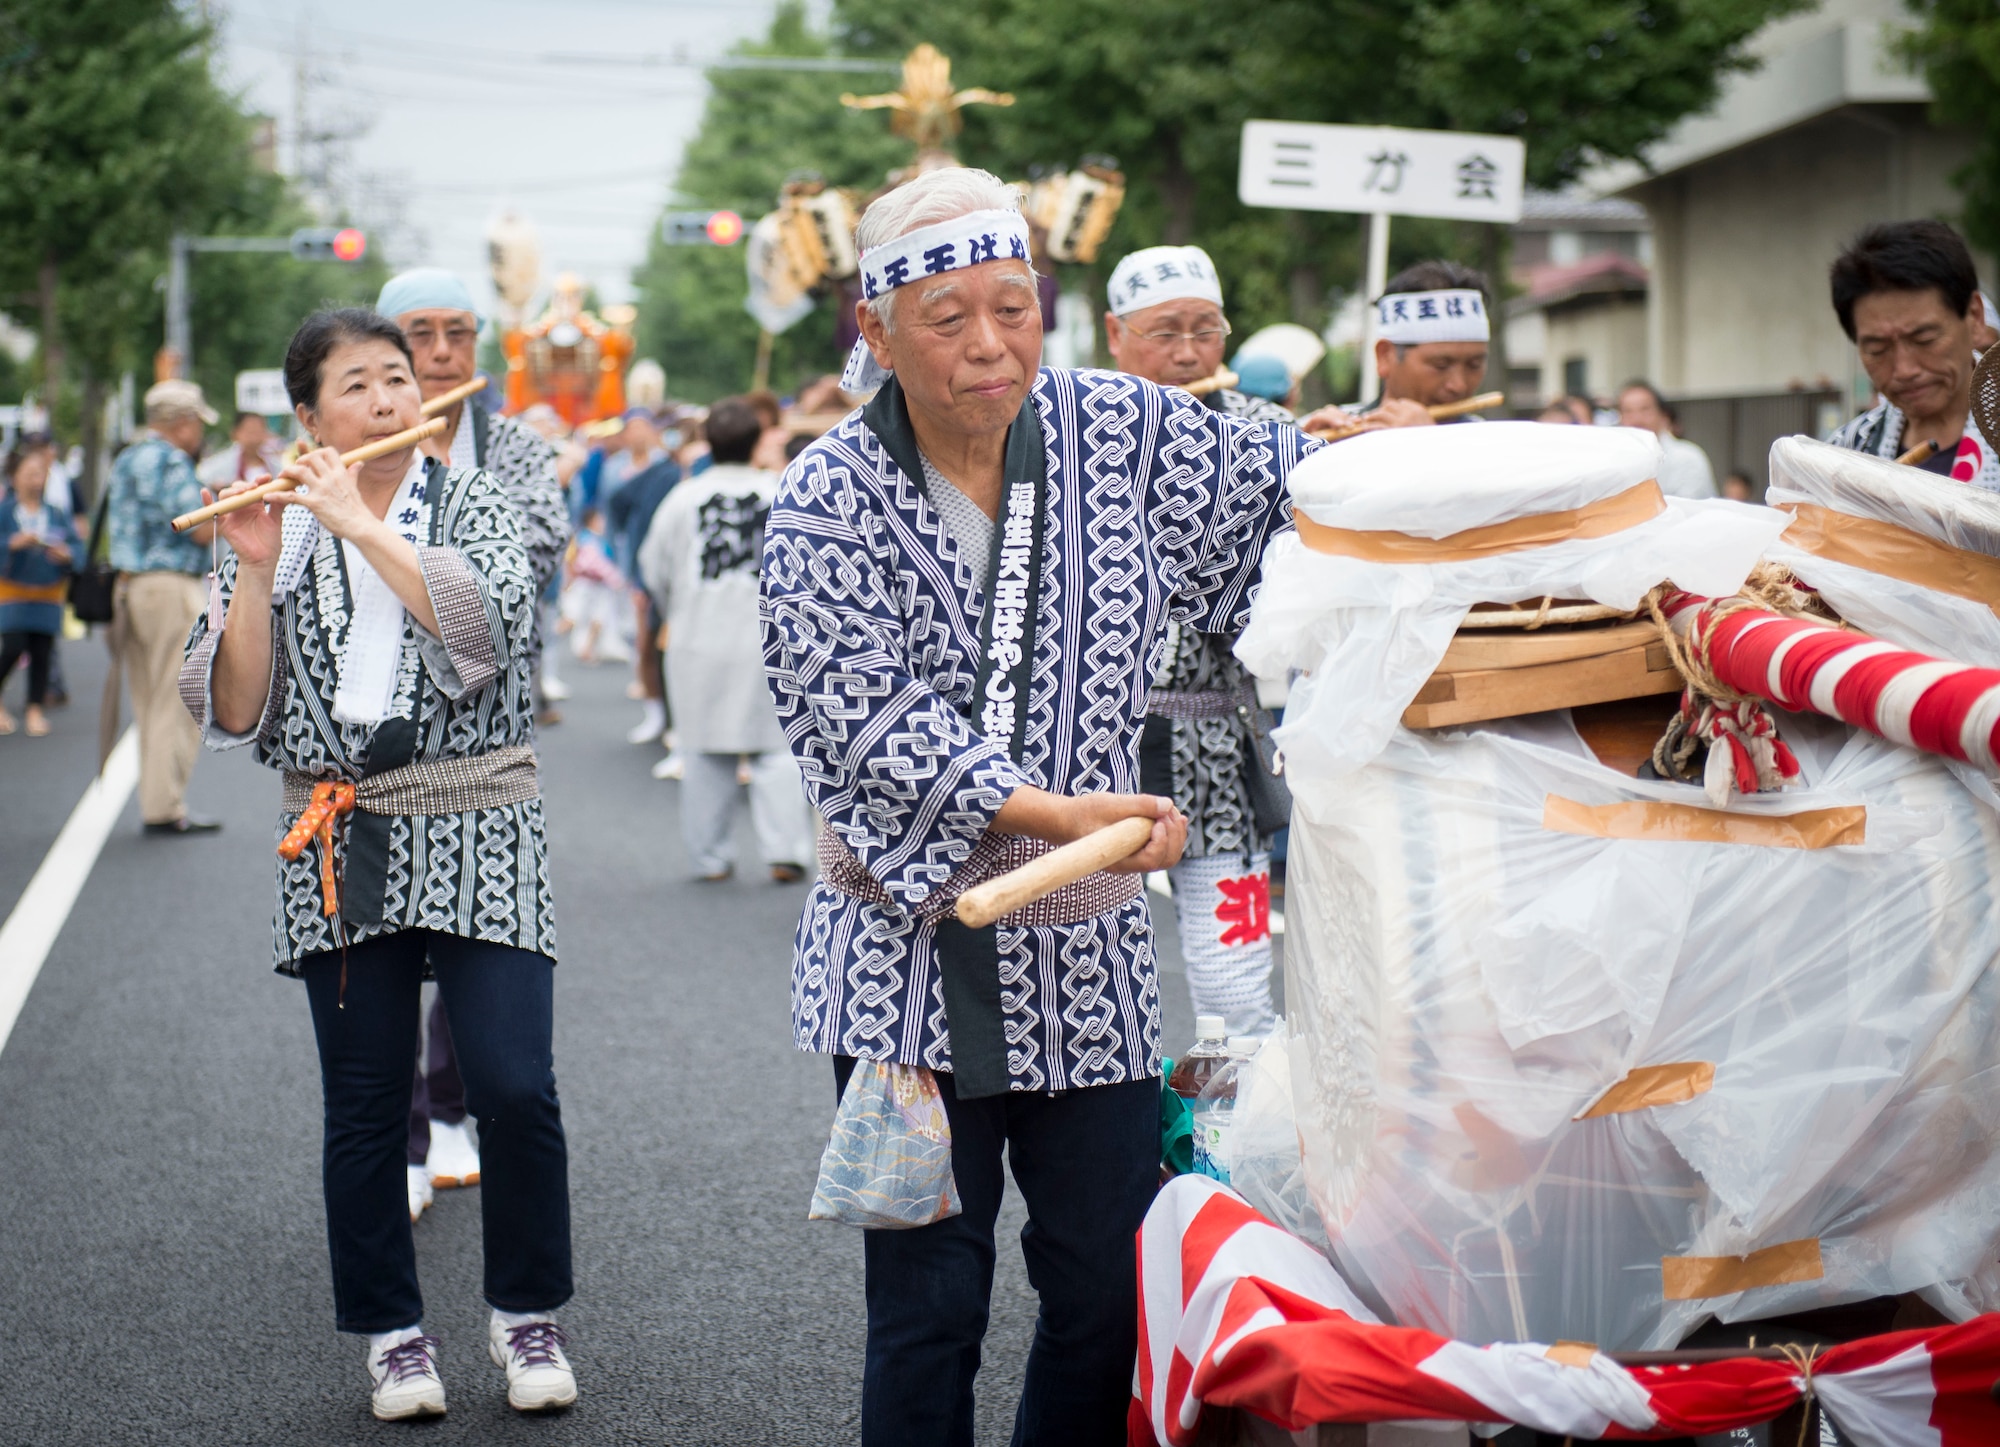 Participants in the Fussa Tanabata Festival parade play instruments as they make their way to Fussa City Hall, Fussa City, Japan, Aug. 8, 2013. Multiple mikoshi shrines were carried from Shinmeisya Shrine to City Hall during the 64th annual Fussa Tanabata Festival.  (U.S. Air Force photo by Airman 1st Class Meagan Schutter/Released)